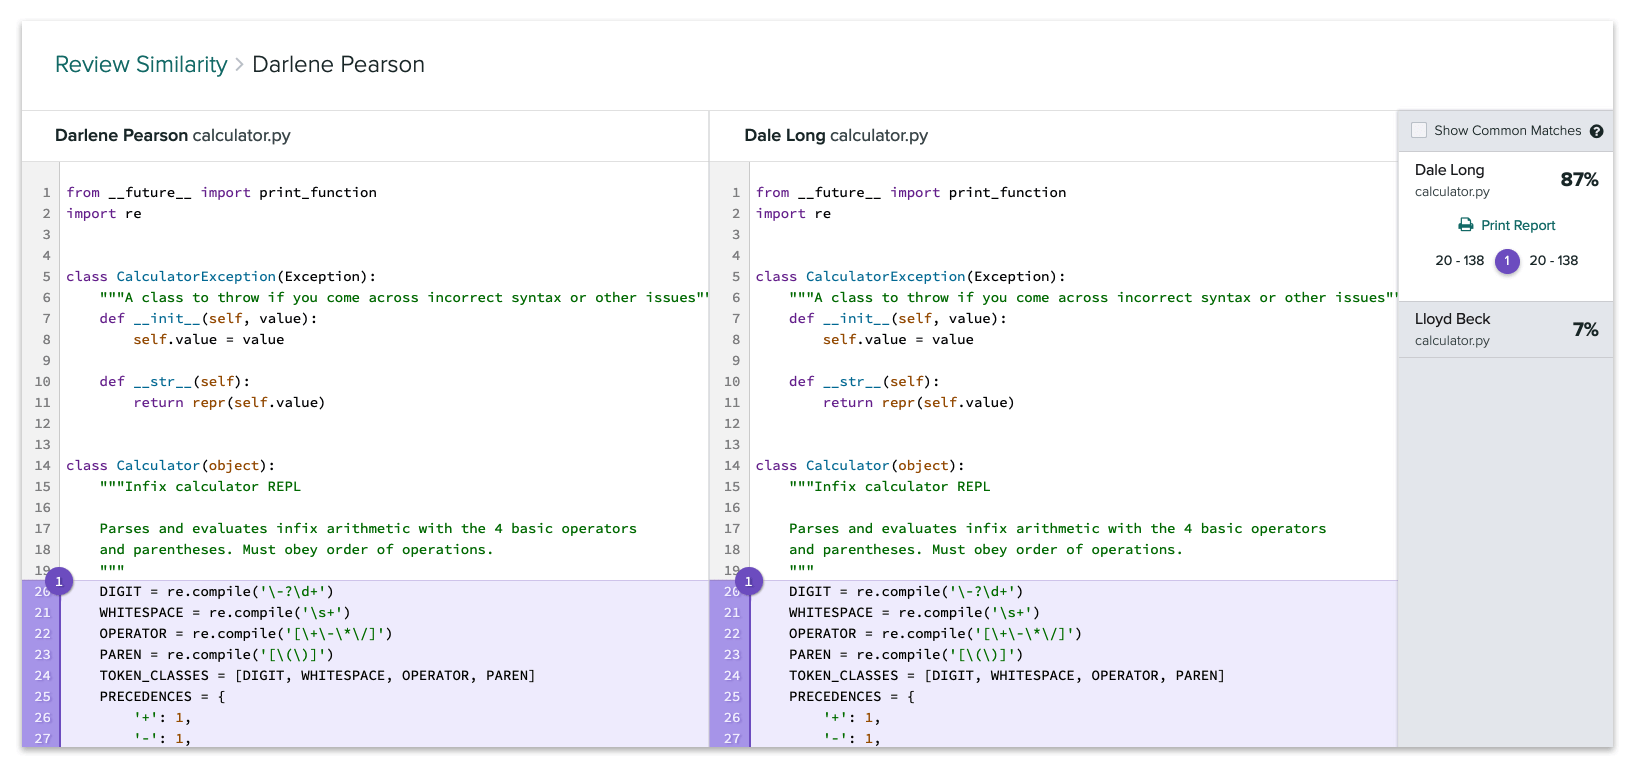 Comparison view of two files showing the similar blocks of code